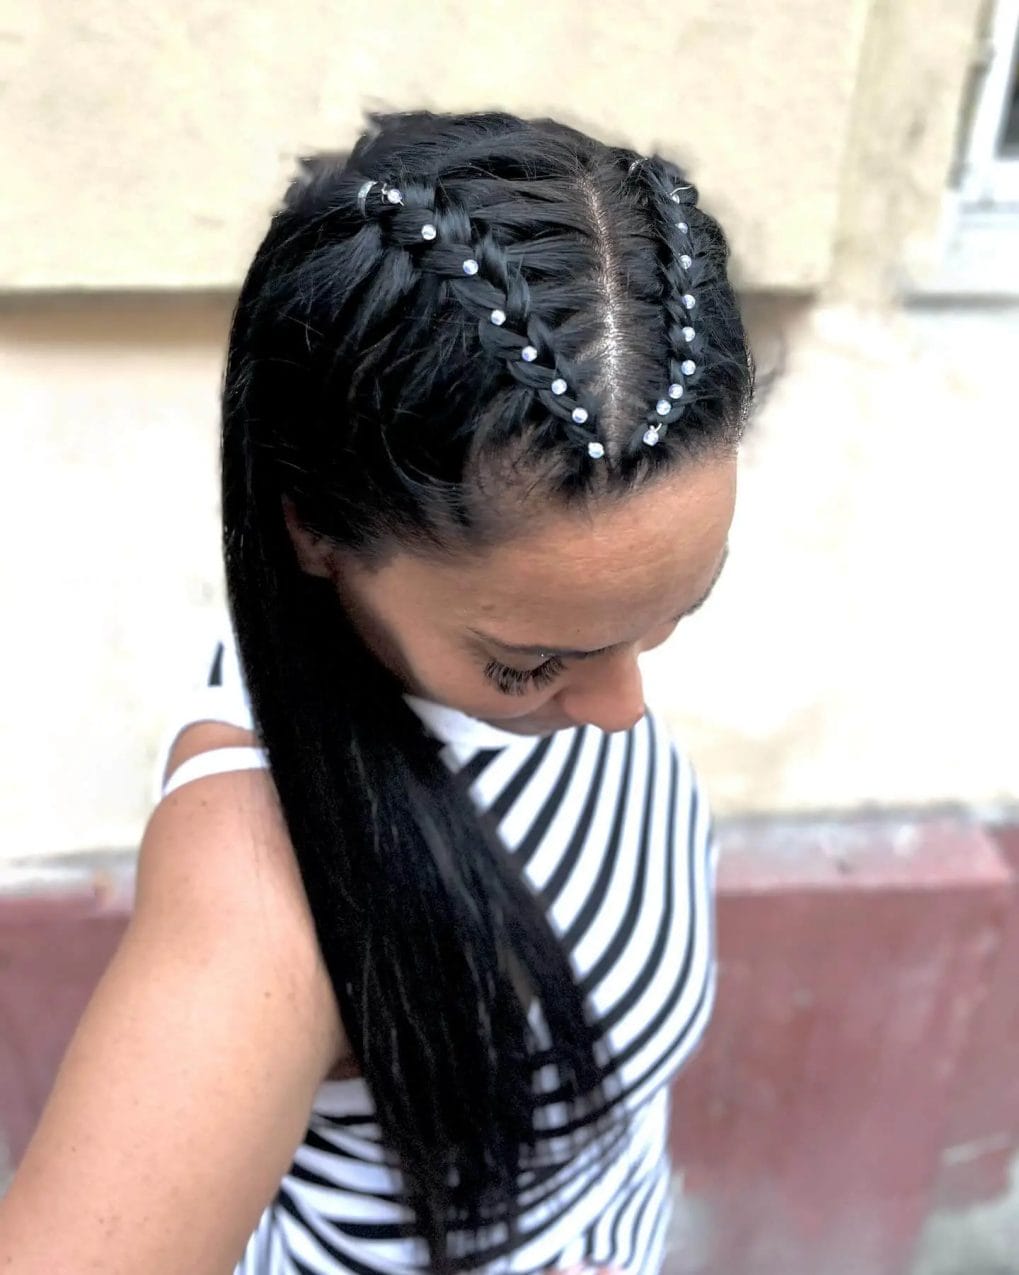 Cornrow braids with small white beads transitioning to long, straight locks.